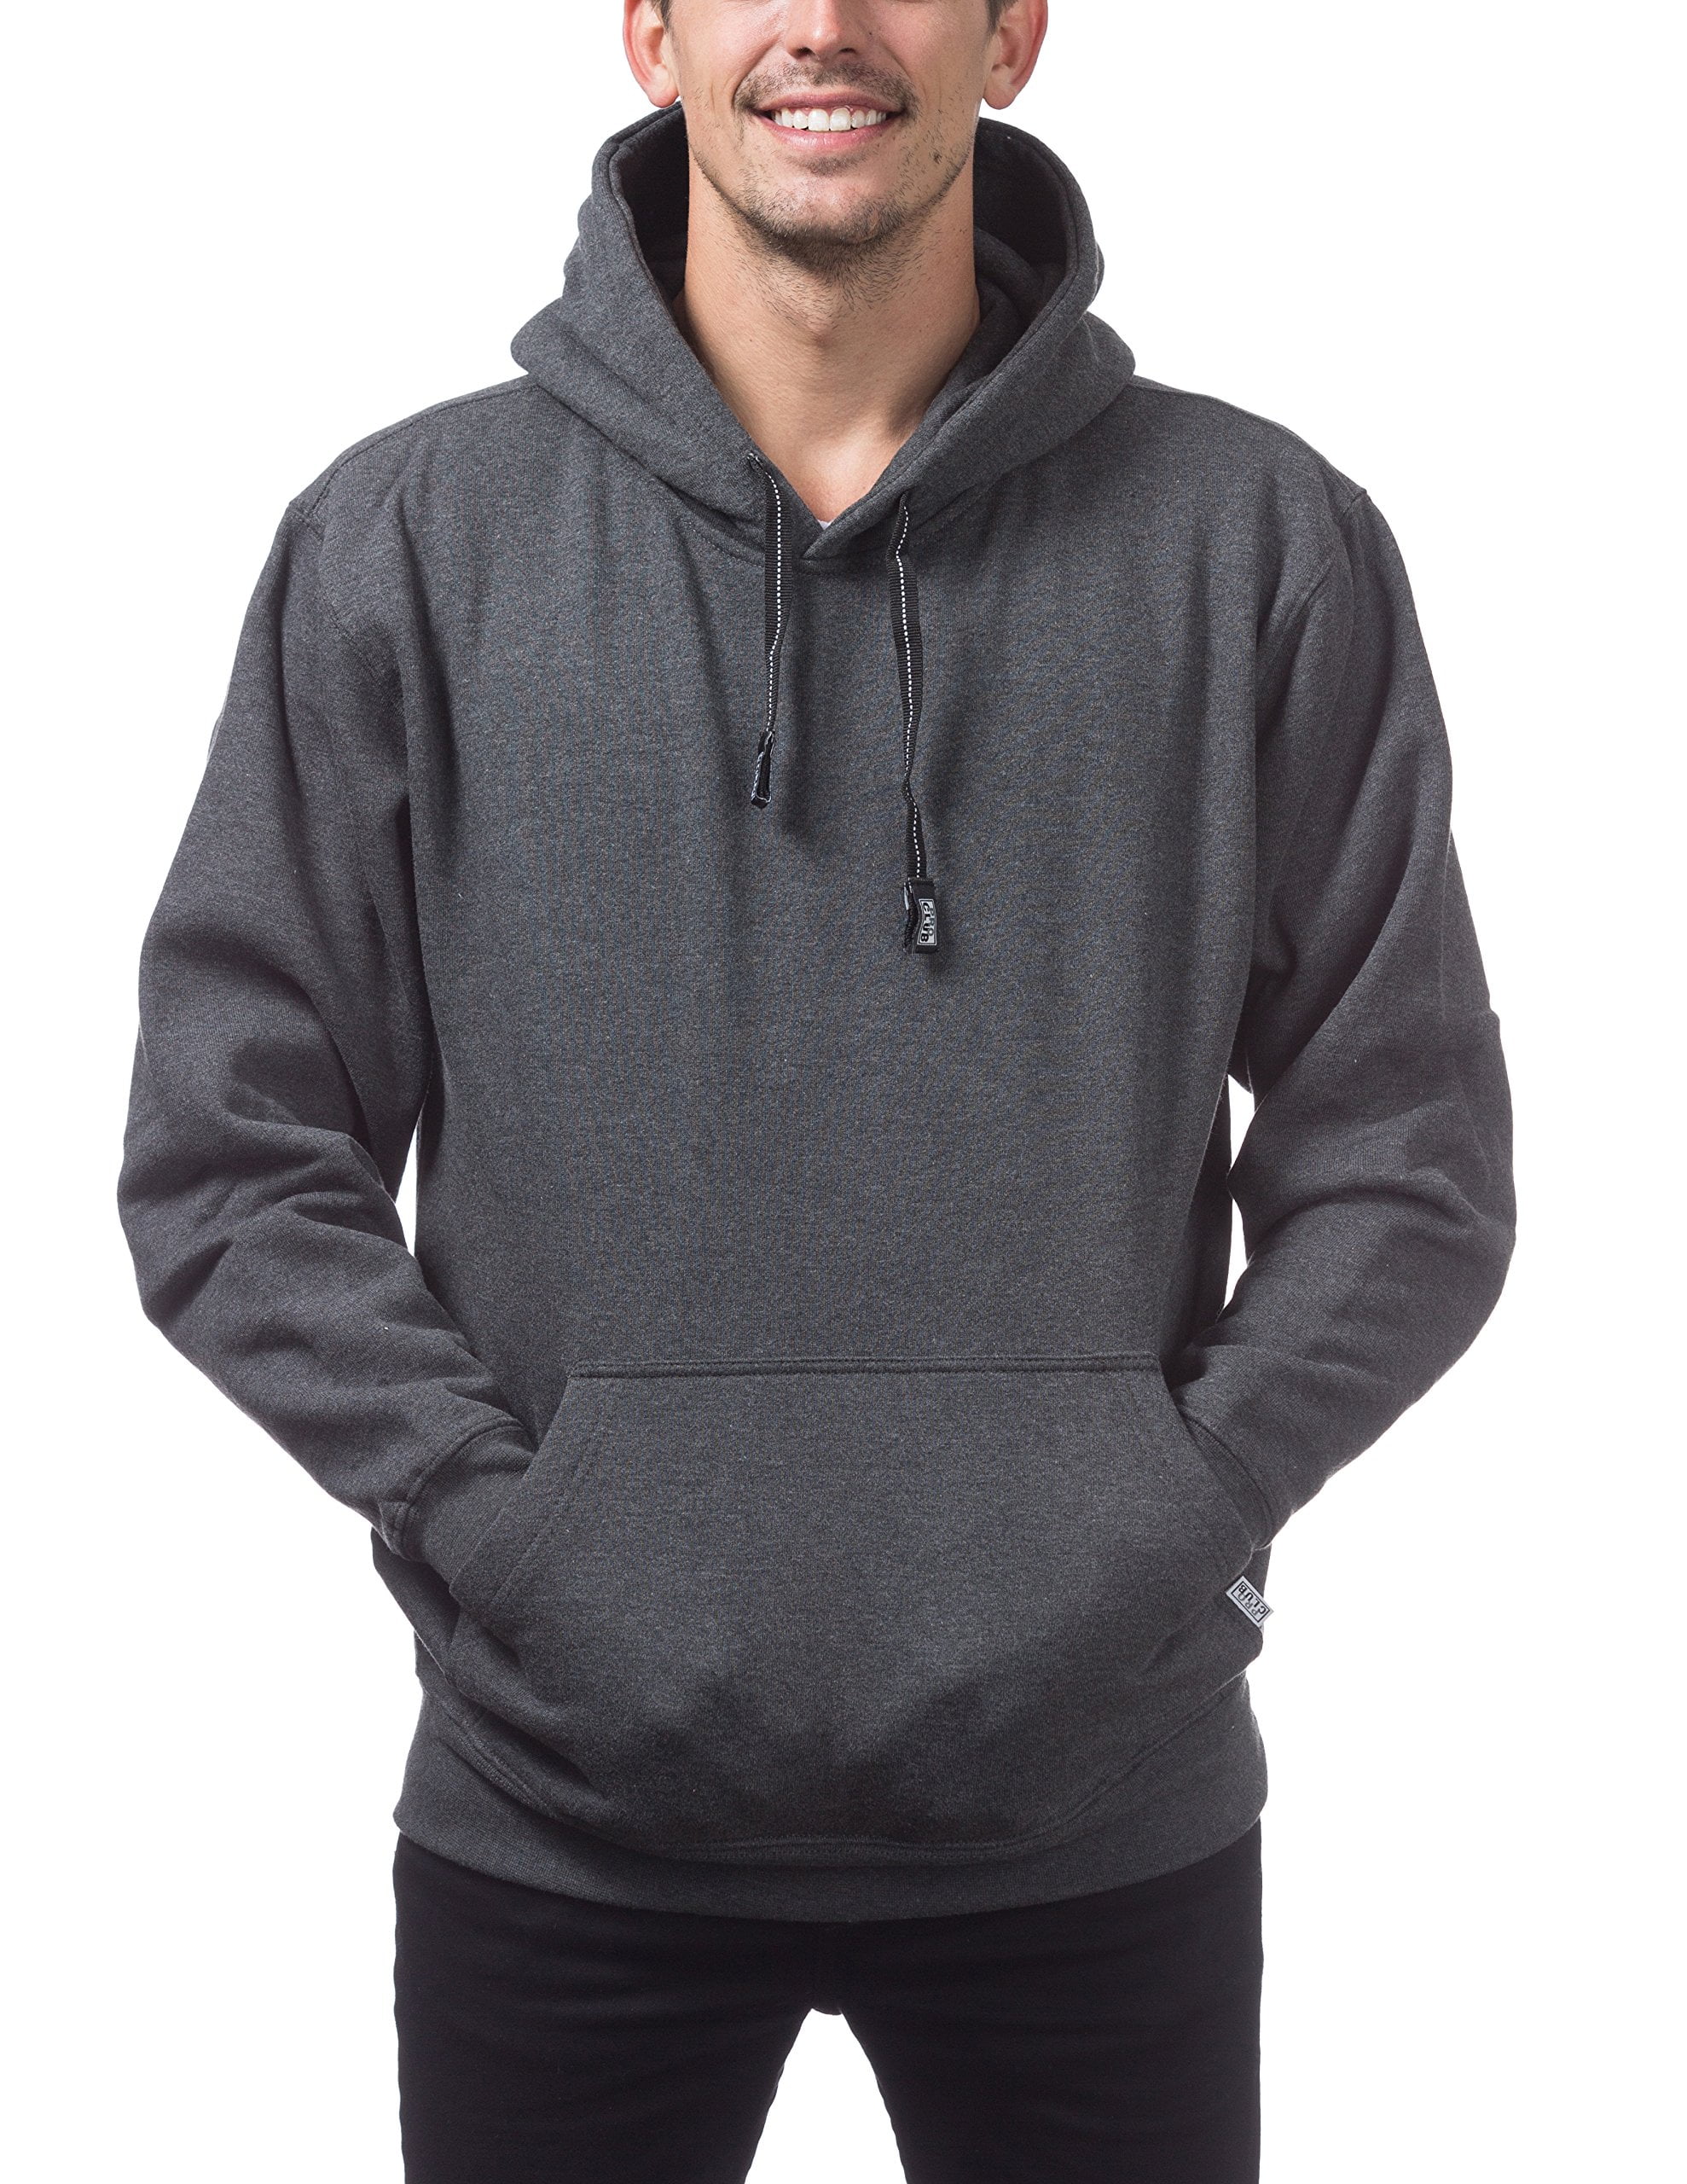 Pro Club Men's Heavyweight Pullover Hoodie (13oz), 4X-Large, Charcoal ...